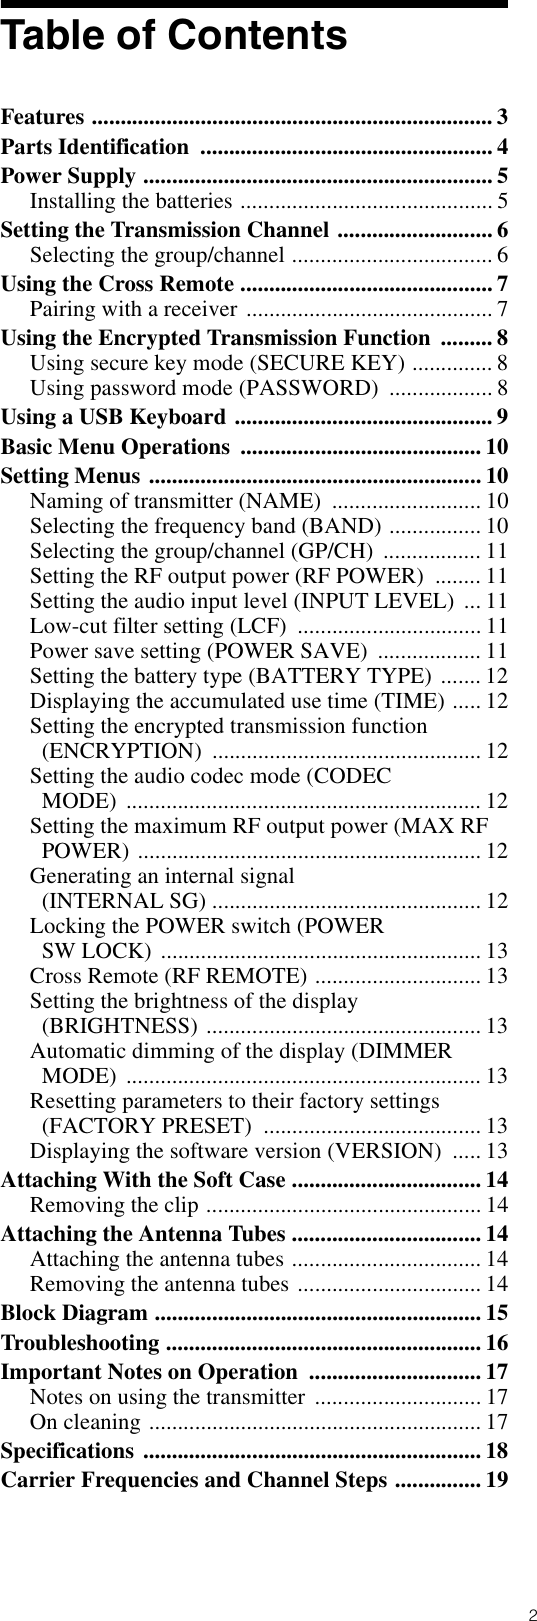 2Table of ContentsFeatures ...................................................................... 3Parts Identification  ................................................... 4Power Supply ............................................................. 5Installing the batteries ............................................ 5Setting the Transmission Channel ........................... 6Selecting the group/channel ................................... 6Using the Cross Remote ............................................ 7Pairing with a receiver ........................................... 7Using the Encrypted Transmission Function  ......... 8Using secure key mode (SECURE KEY) .............. 8Using password mode (PASSWORD)  .................. 8Using a USB Keyboard ............................................. 9Basic Menu Operations  .......................................... 10Setting Menus .......................................................... 10Naming of transmitter (NAME)  .......................... 10Selecting the frequency band (BAND) ................ 10Selecting the group/channel (GP/CH)  ................. 11Setting the RF output power (RF POWER)  ........ 11Setting the audio input level (INPUT LEVEL)  ... 11Low-cut filter setting (LCF)  ................................ 11Power save setting (POWER SAVE)  .................. 11Setting the battery type (BATTERY TYPE) ....... 12Displaying the accumulated use time (TIME) ..... 12Setting the encrypted transmission function (ENCRYPTION) ............................................... 12Setting the audio codec mode (CODEC MODE) .............................................................. 12Setting the maximum RF output power (MAX RF POWER) ............................................................ 12Generating an internal signal (INTERNAL SG) ............................................... 12Locking the POWER switch (POWER SW LOCK)  ........................................................ 13Cross Remote (RF REMOTE) ............................. 13Setting the brightness of the display (BRIGHTNESS) ................................................ 13Automatic dimming of the display (DIMMER MODE) .............................................................. 13Resetting parameters to their factory settings (FACTORY PRESET)  ...................................... 13Displaying the software version (VERSION)  ..... 13Attaching With the Soft Case ................................. 14Removing the clip ................................................ 14Attaching the Antenna Tubes ................................. 14Attaching the antenna tubes ................................. 14Removing the antenna tubes ................................ 14Block Diagram ......................................................... 15Troubleshooting ....................................................... 16Important Notes on Operation  .............................. 17Notes on using the transmitter  ............................. 17On cleaning .......................................................... 17Specifications ........................................................... 18Carrier Frequencies and Channel Steps ............... 19